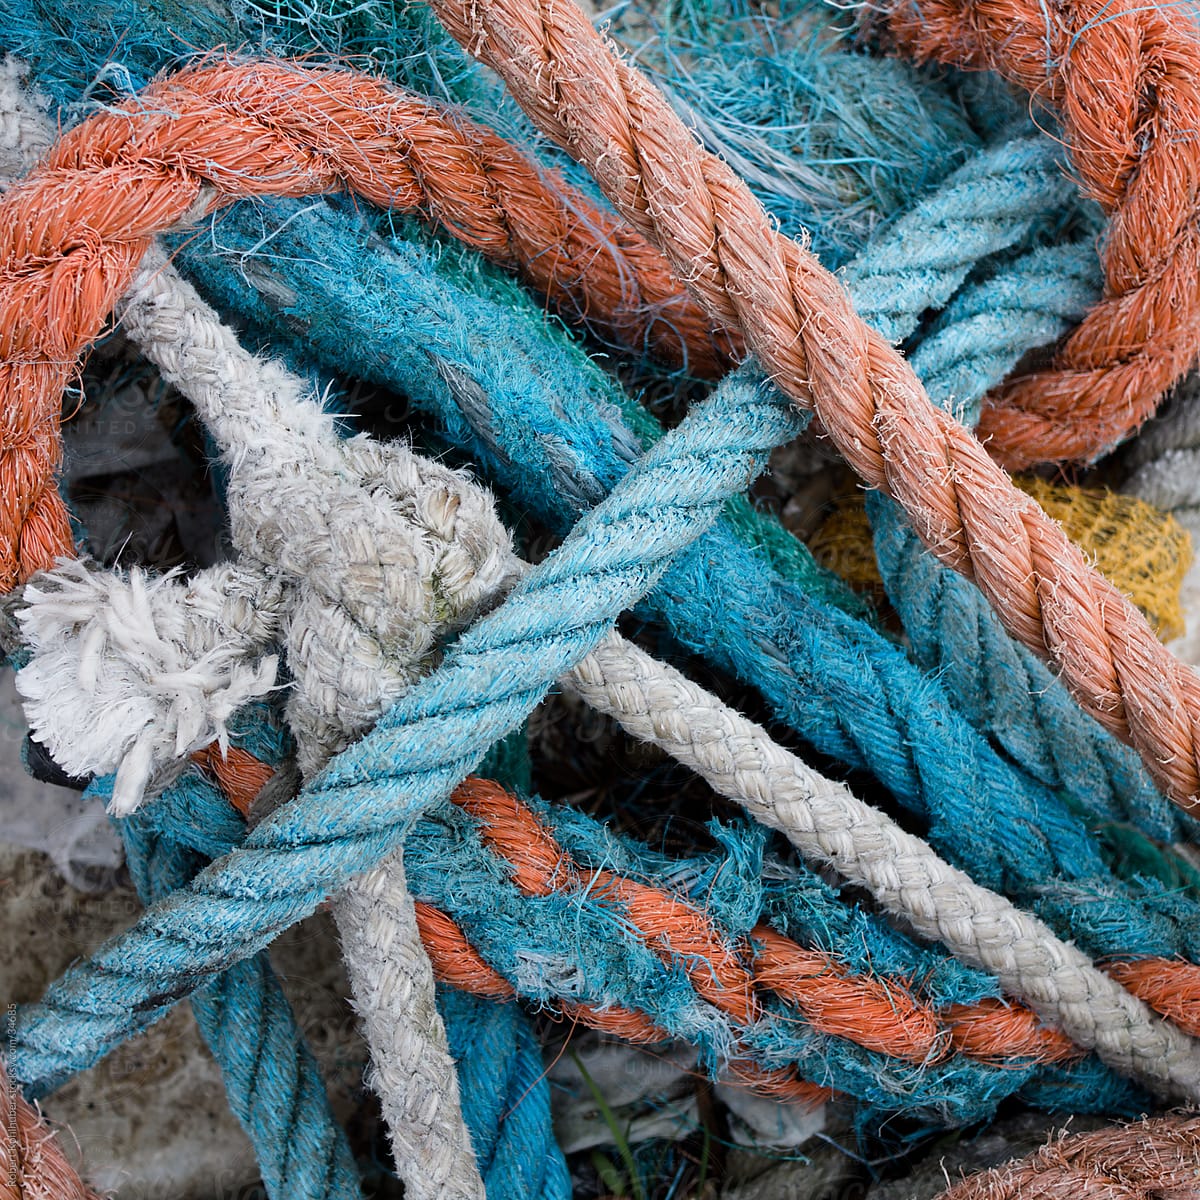 Colorful old frayed boat ropes